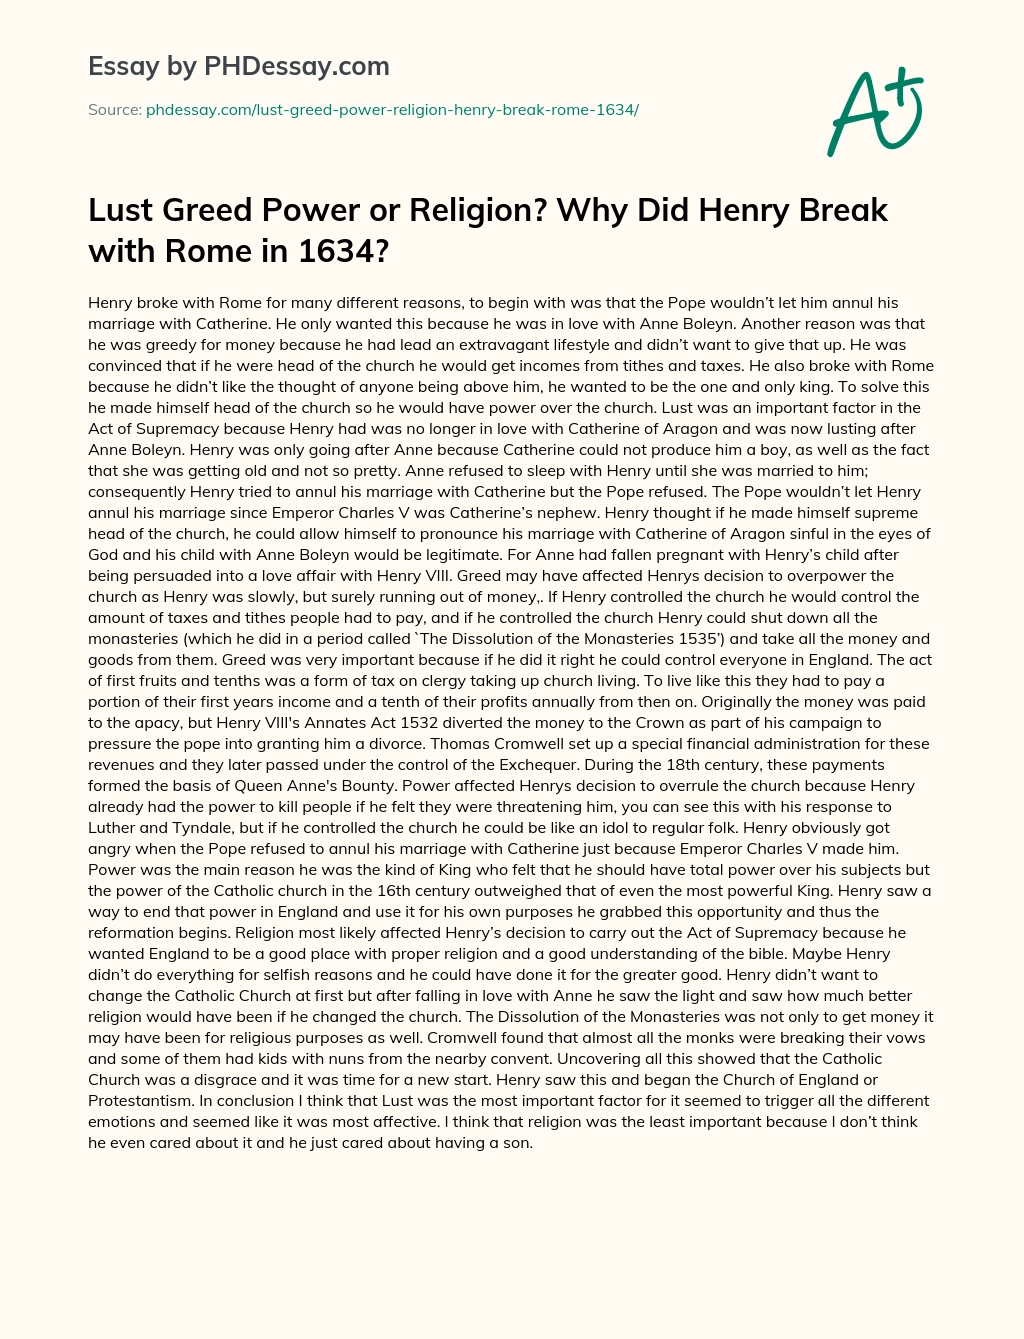 Lust Greed Power or Religion? Why Did Henry Break with Rome in 1634? essay